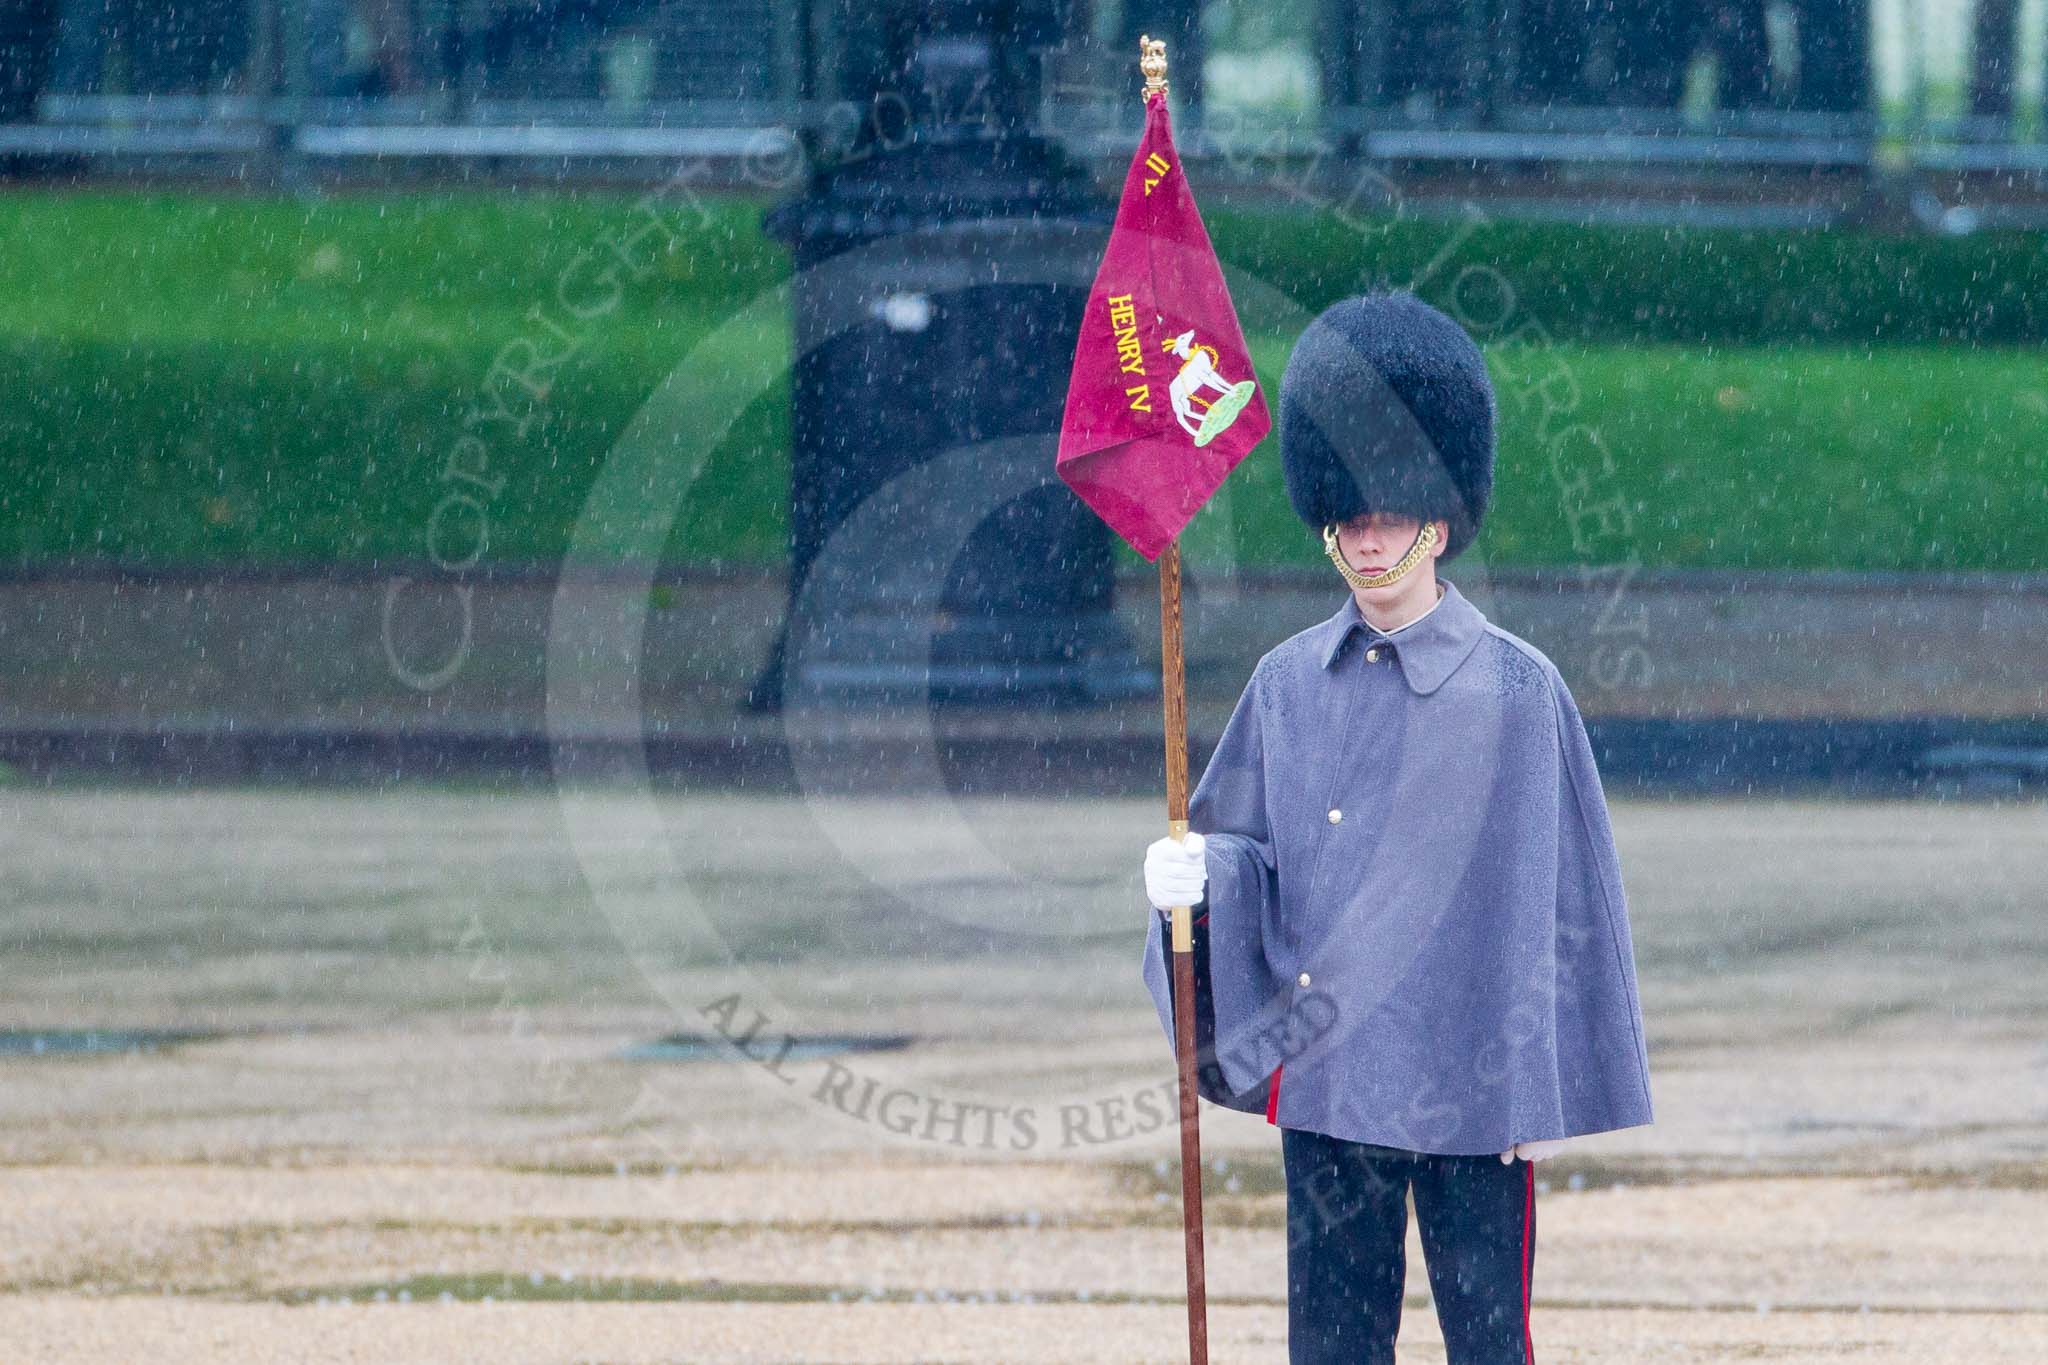 The Colonel's Review 2014.
Horse Guards Parade, Westminster,
London,

United Kingdom,
on 07 June 2014 at 10:23, image #110